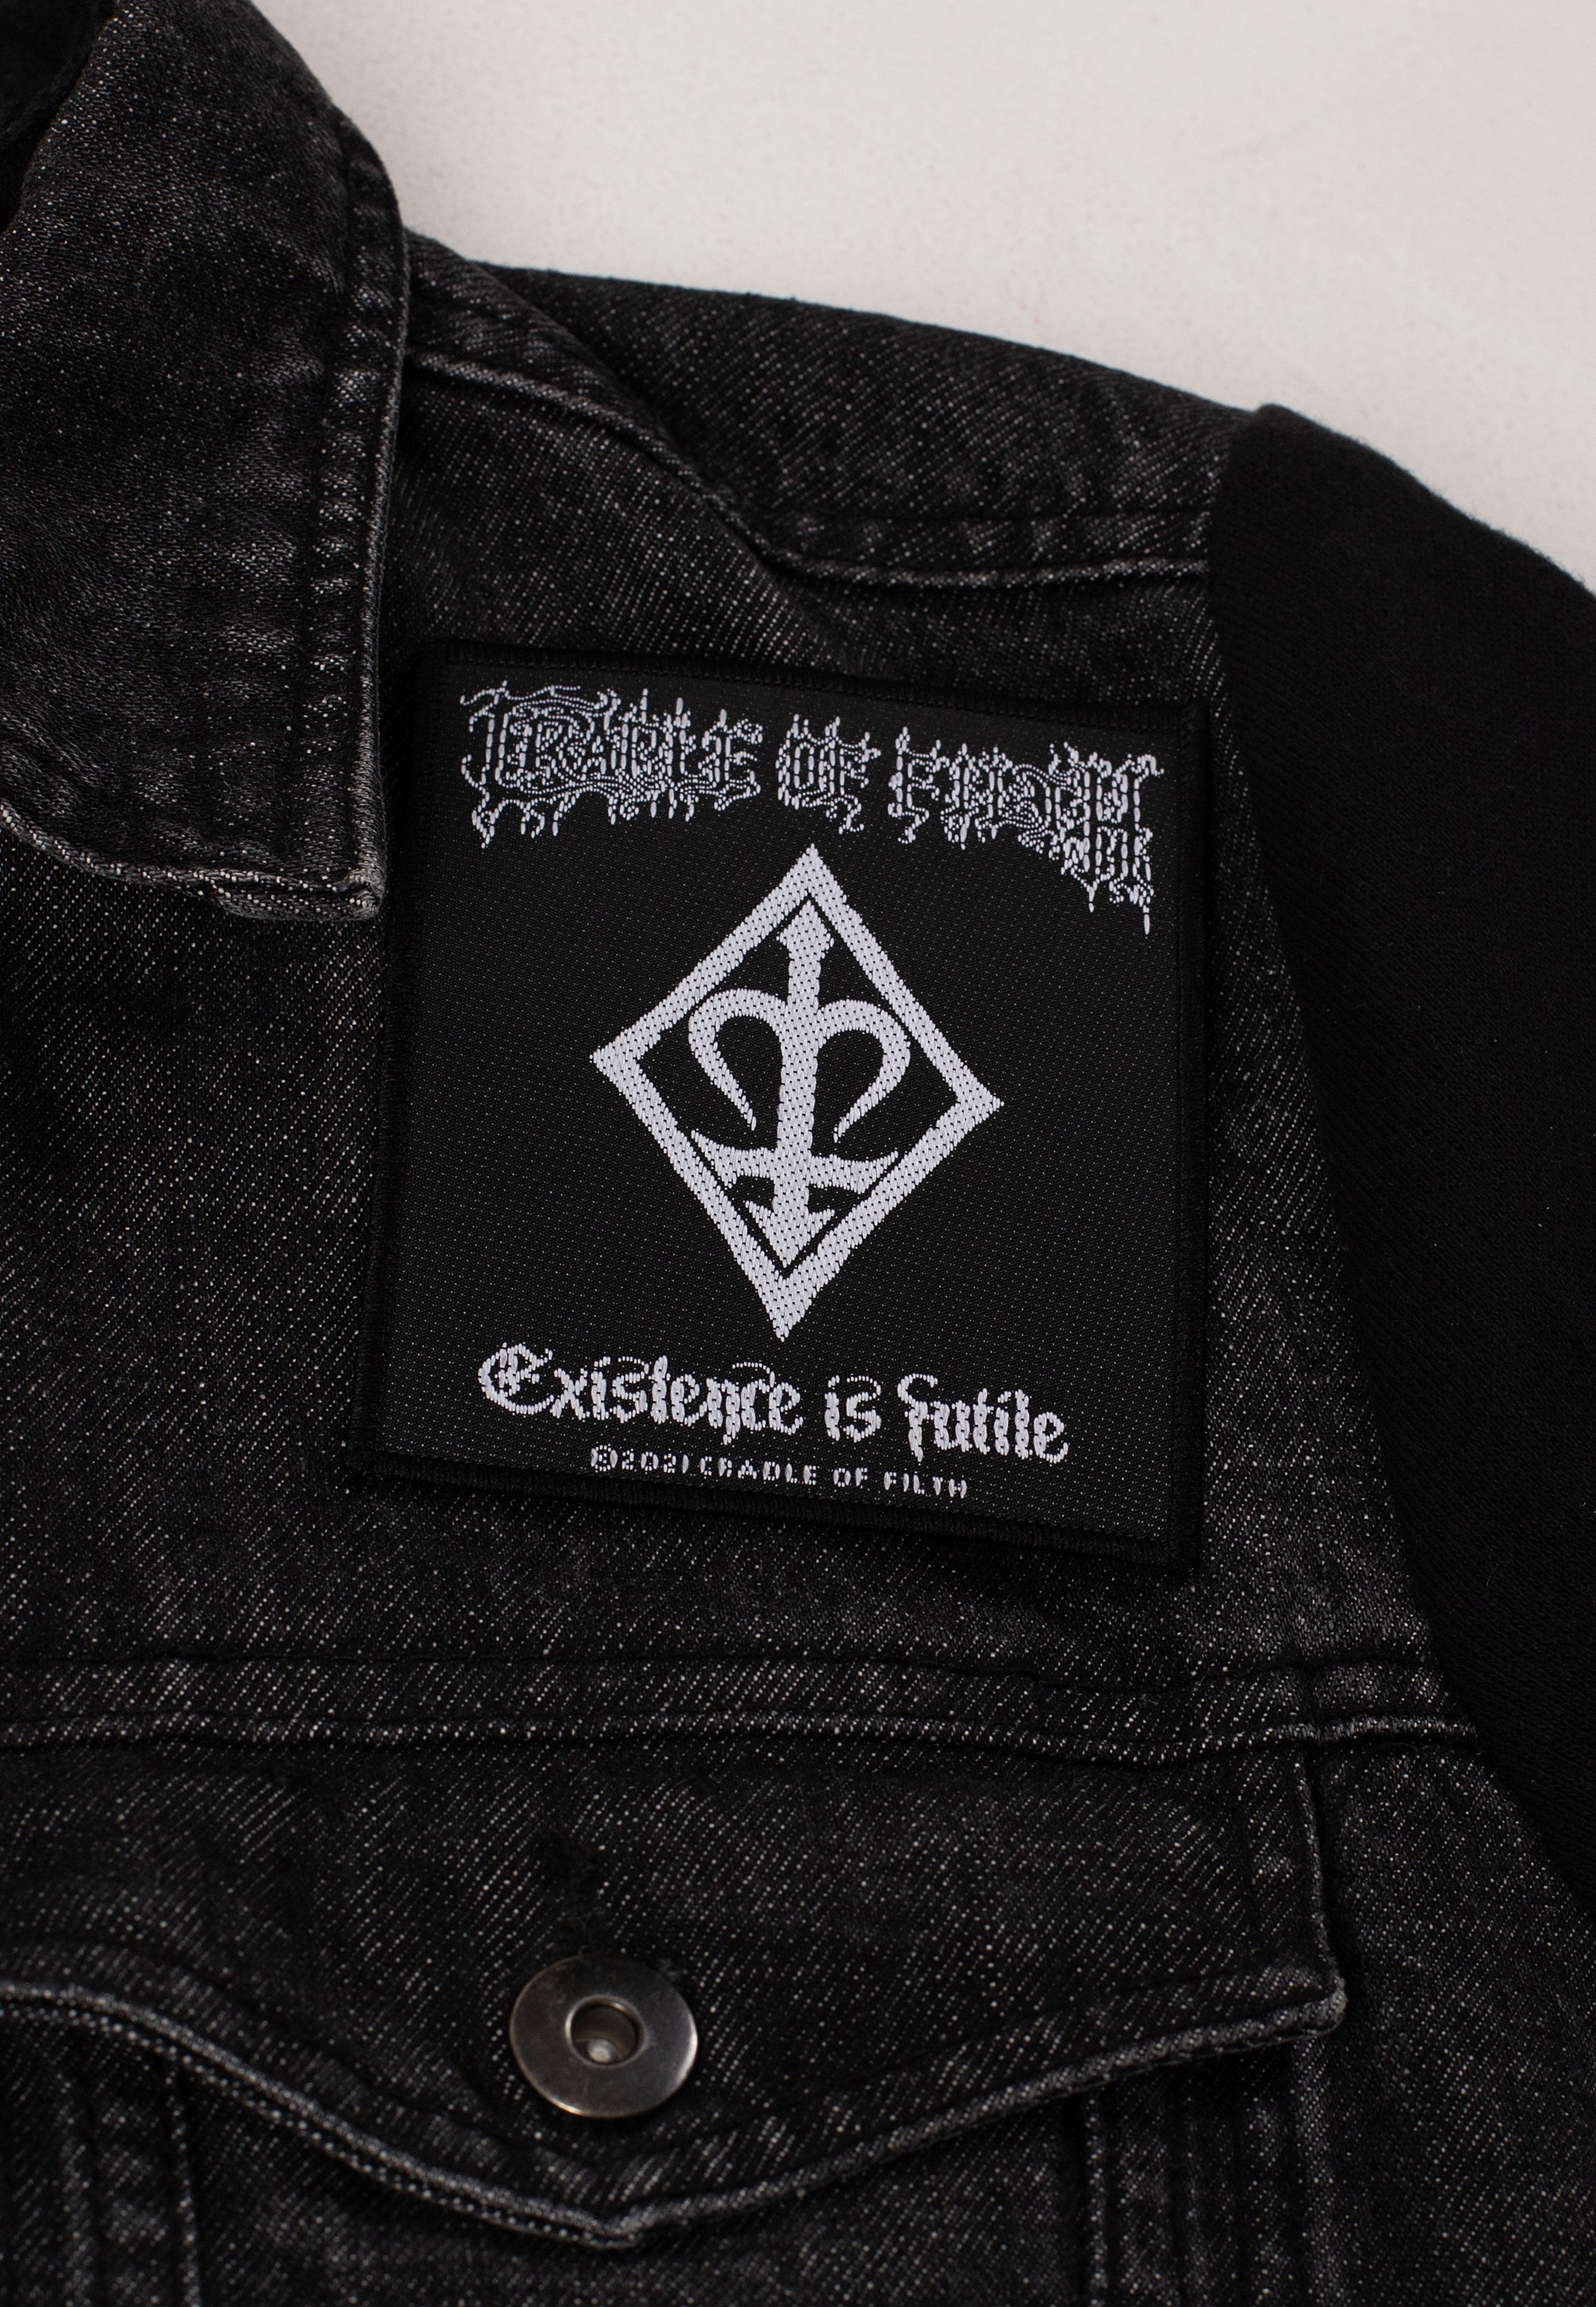 Cradle Of Filth - Existence Is Futile - Patch